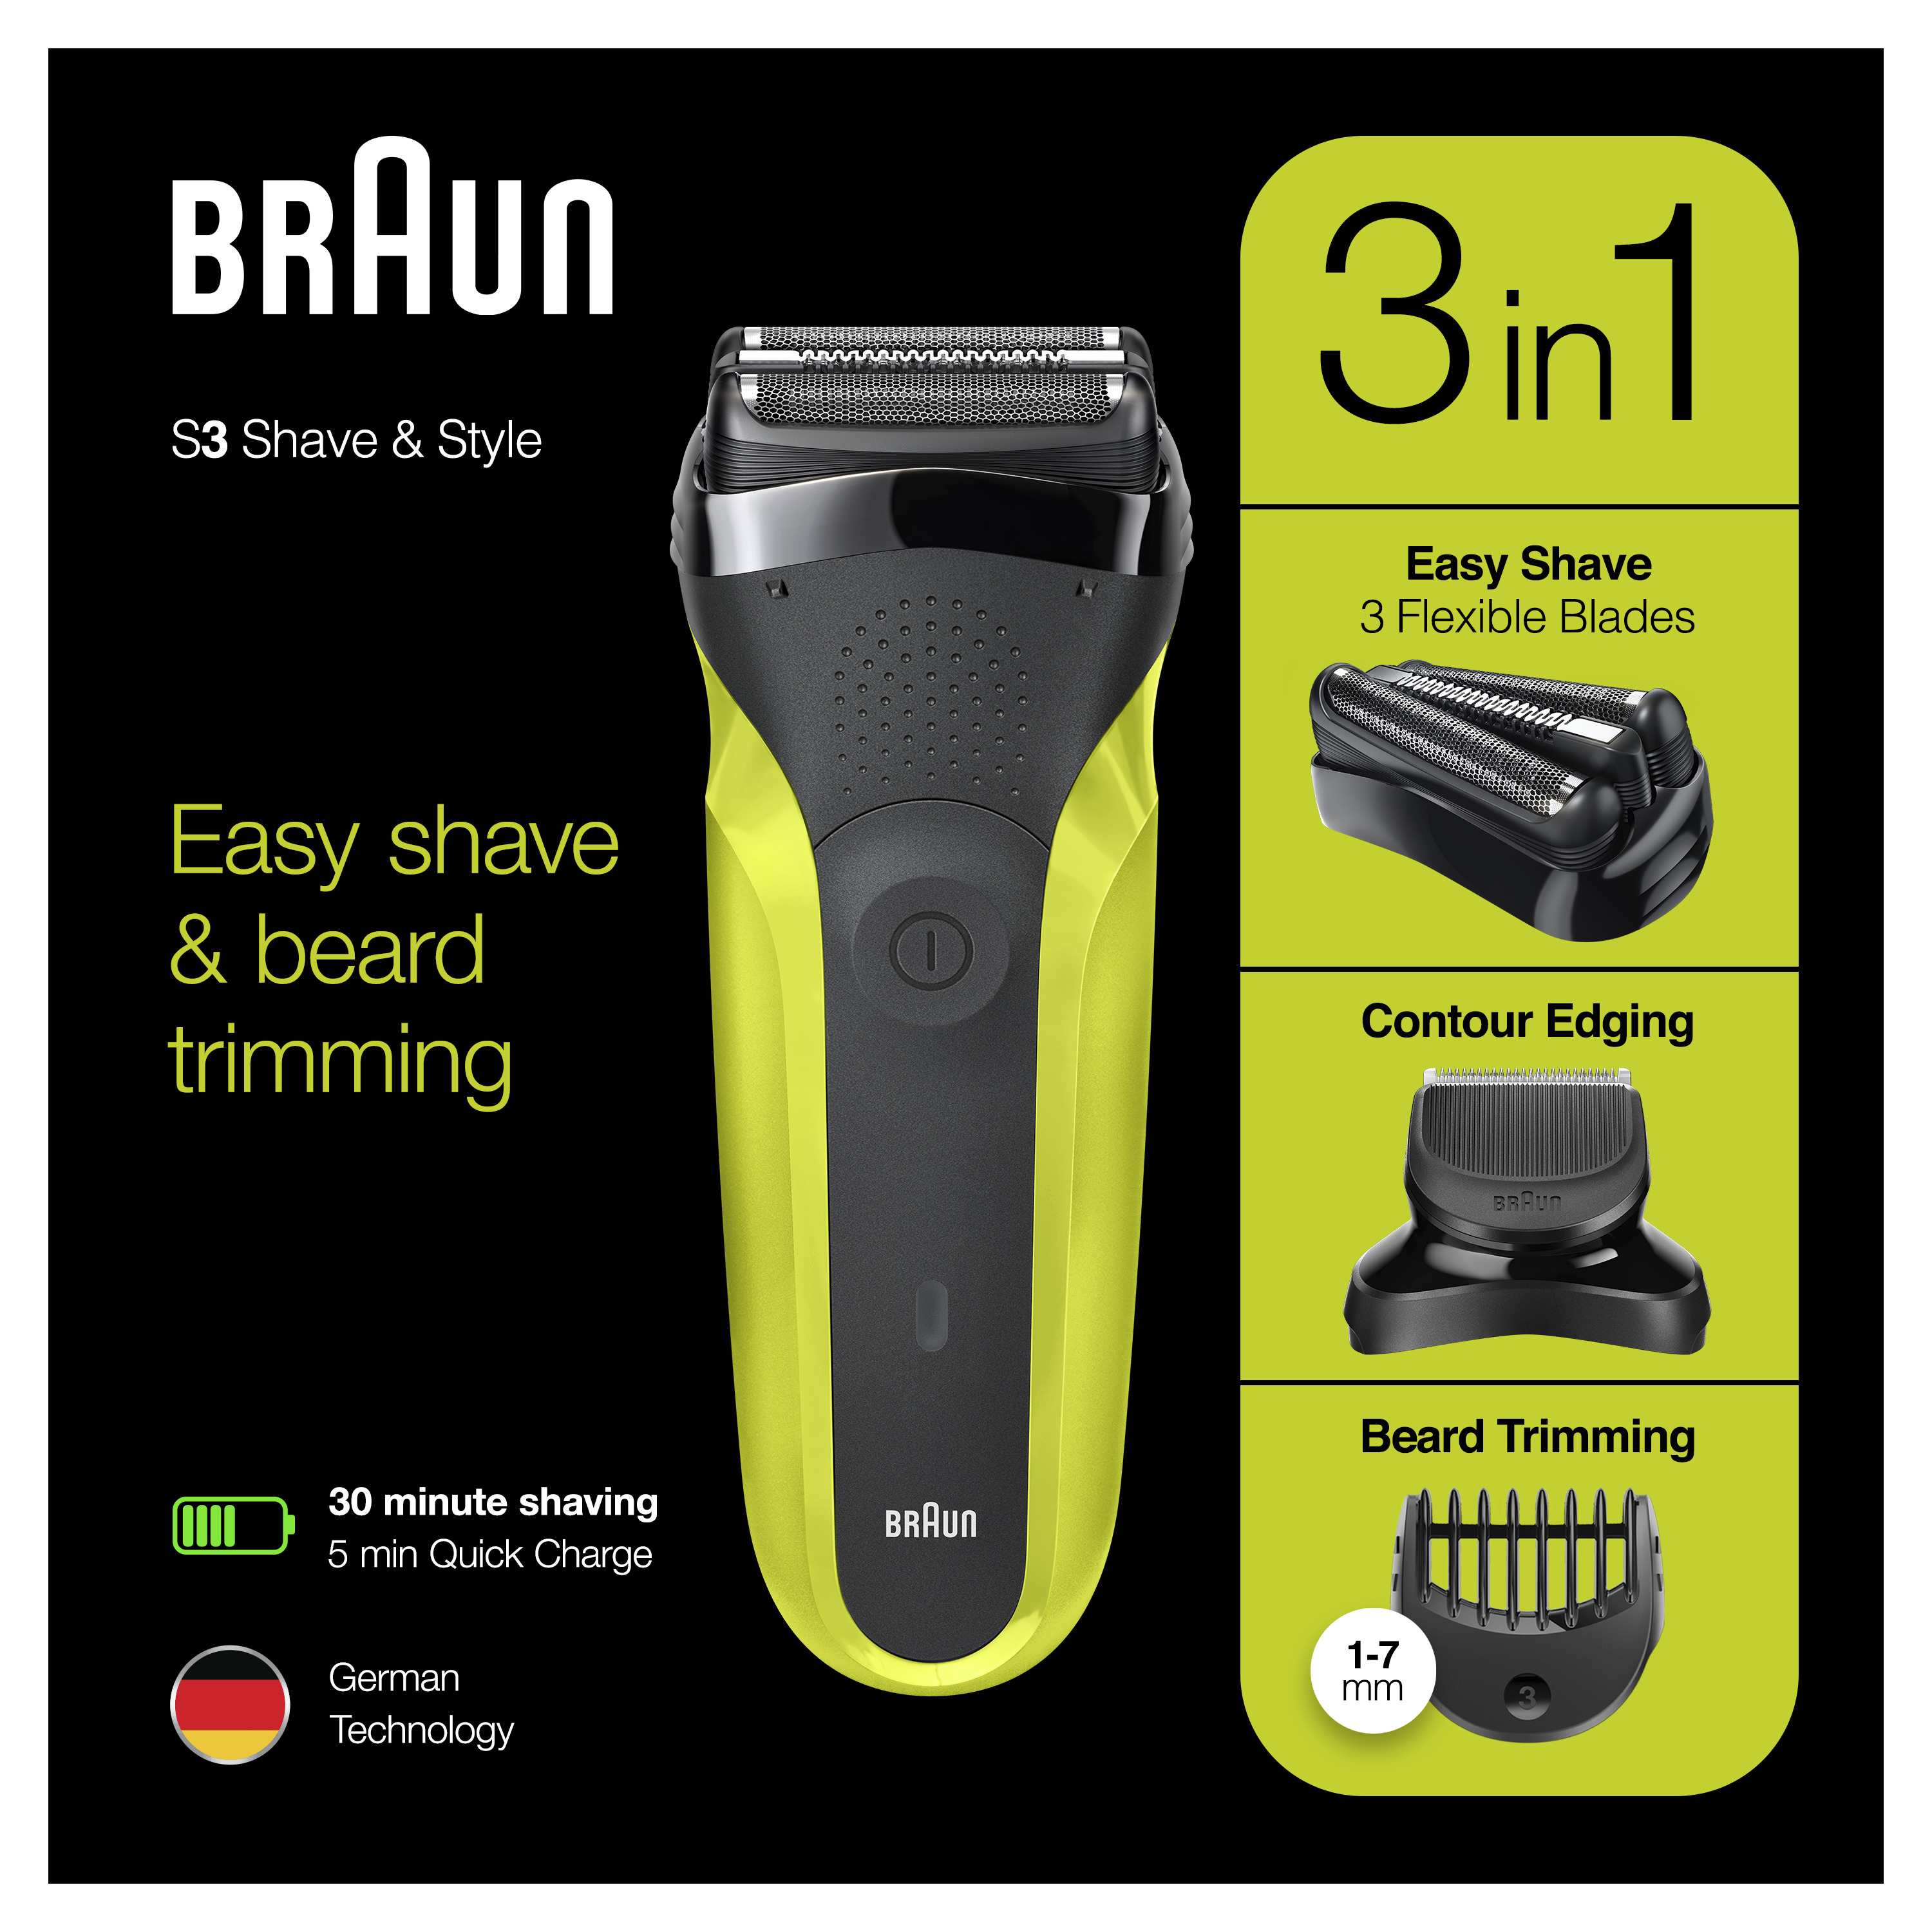 best trimmer for body and beard